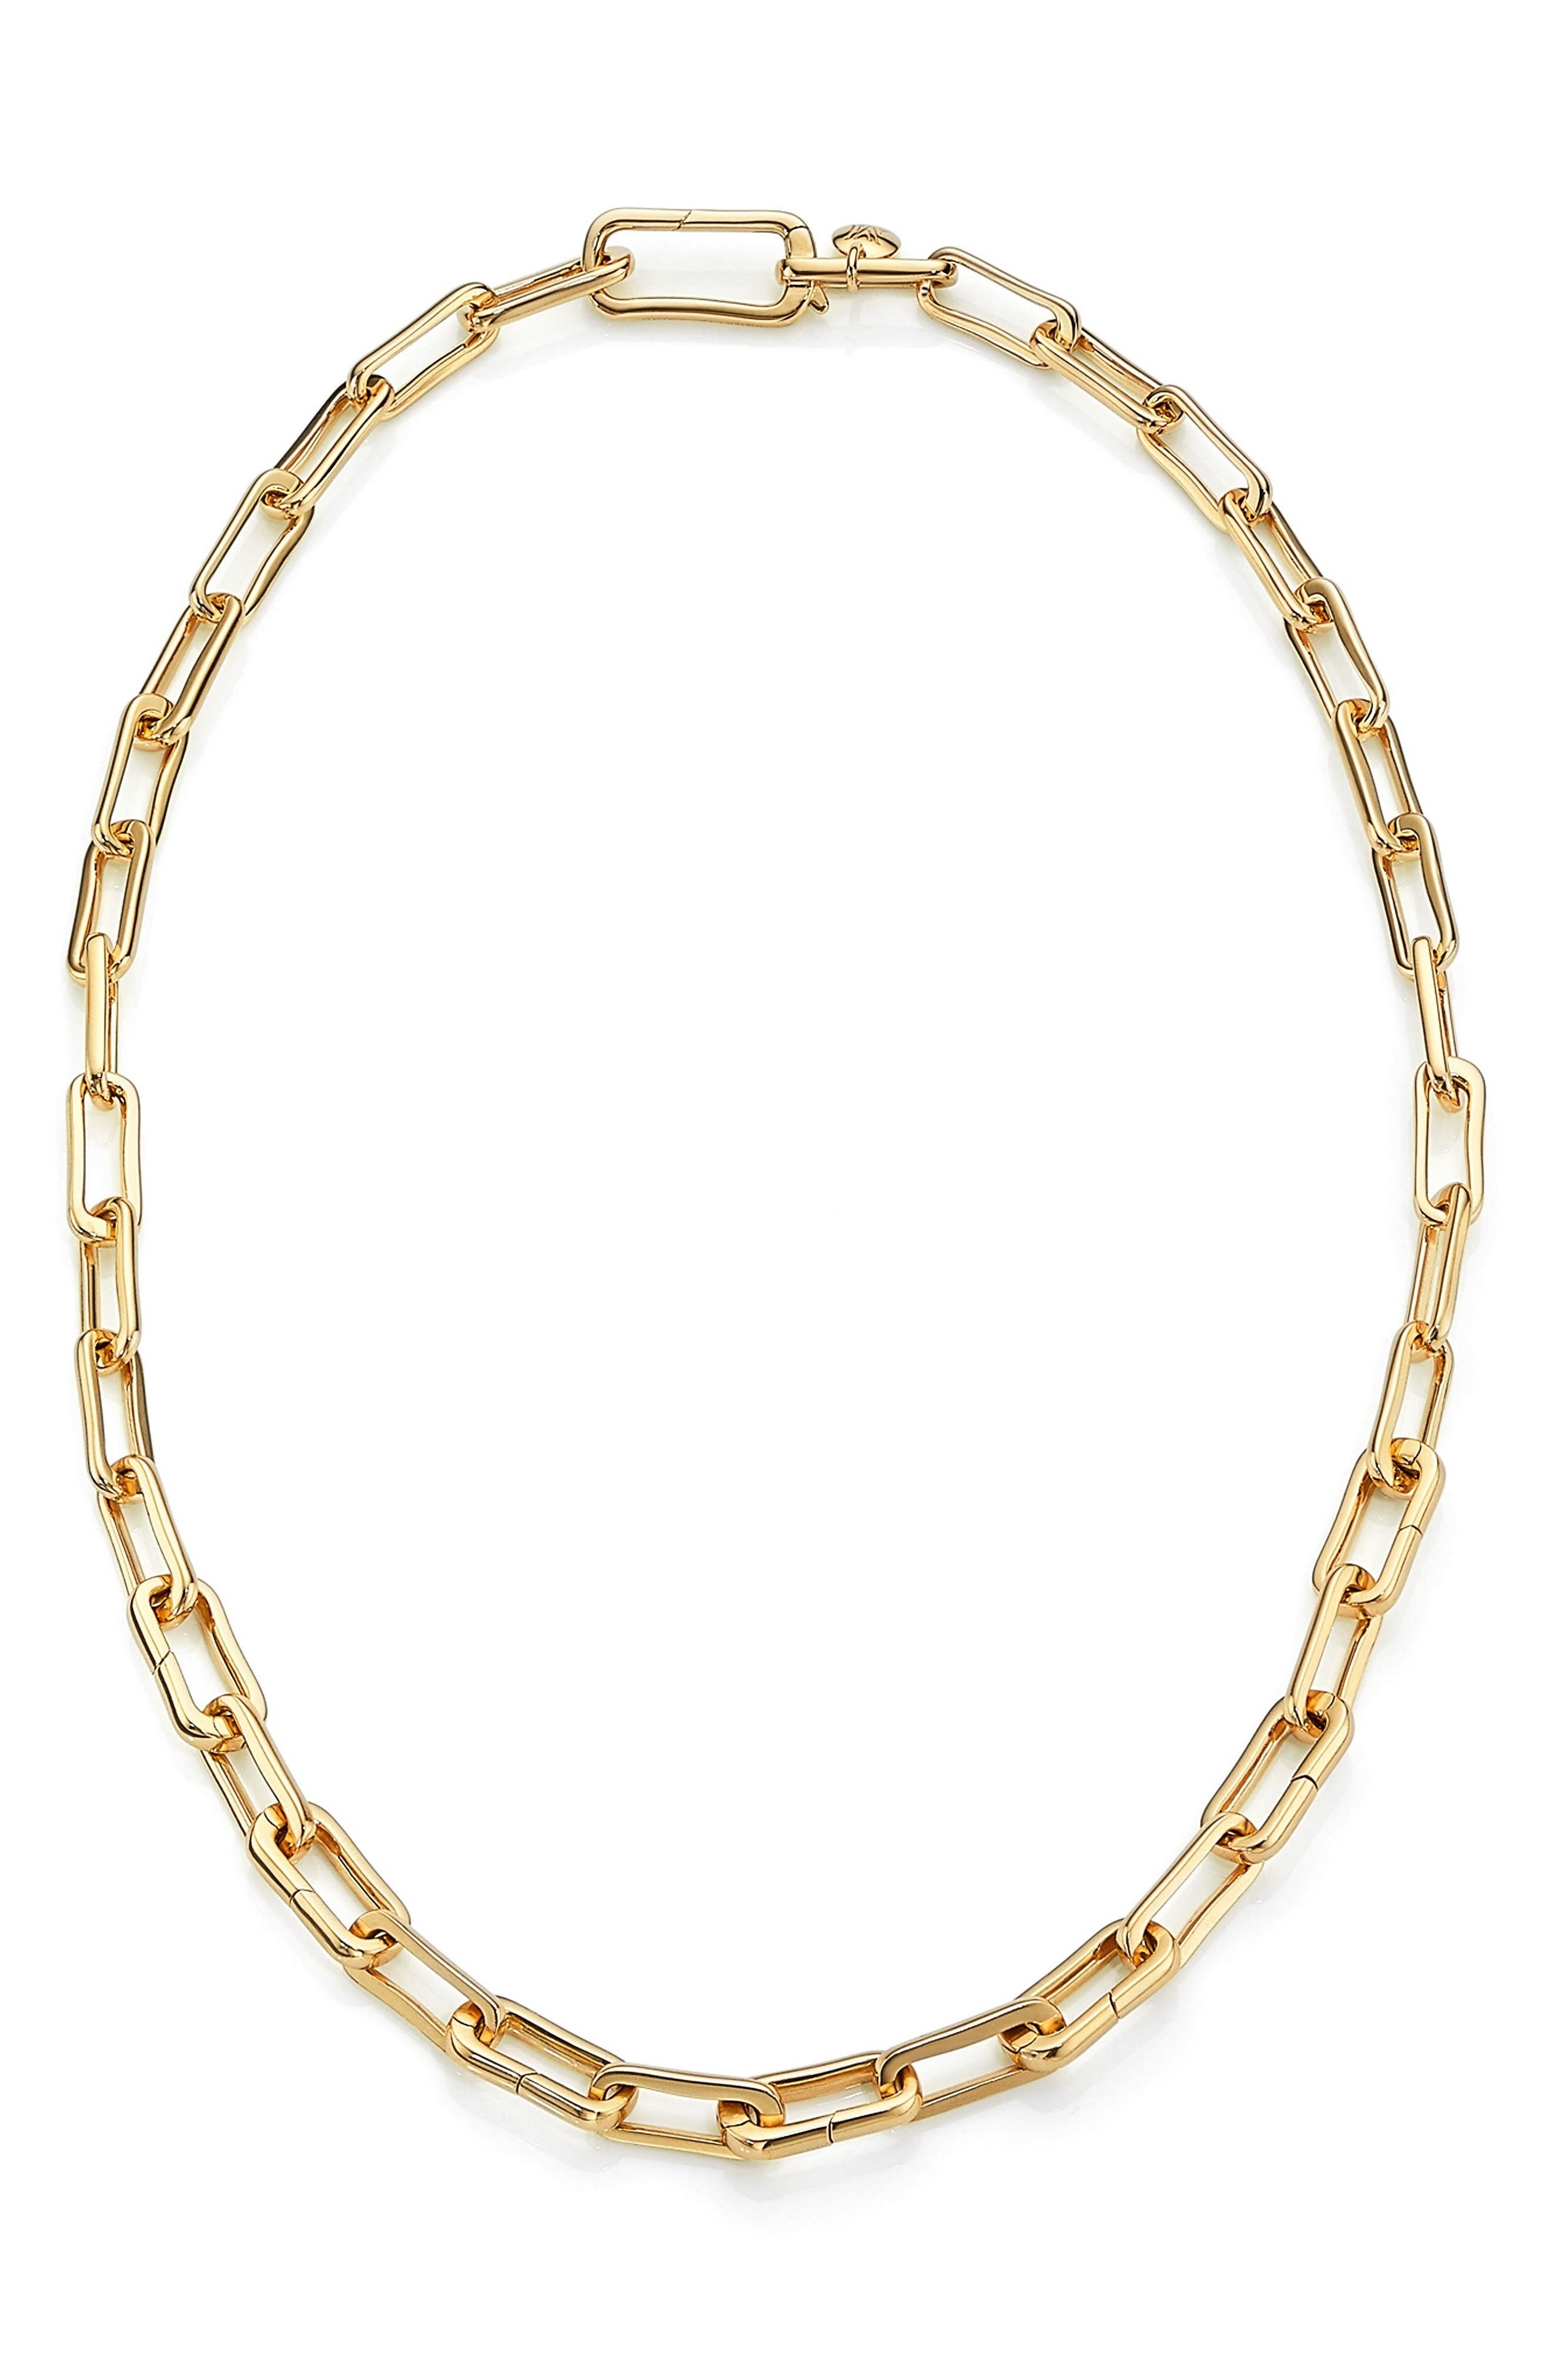 Monica Vinader Alta Capture Necklace in Yellow Gold at Nordstrom, Size 17 In | Nordstrom